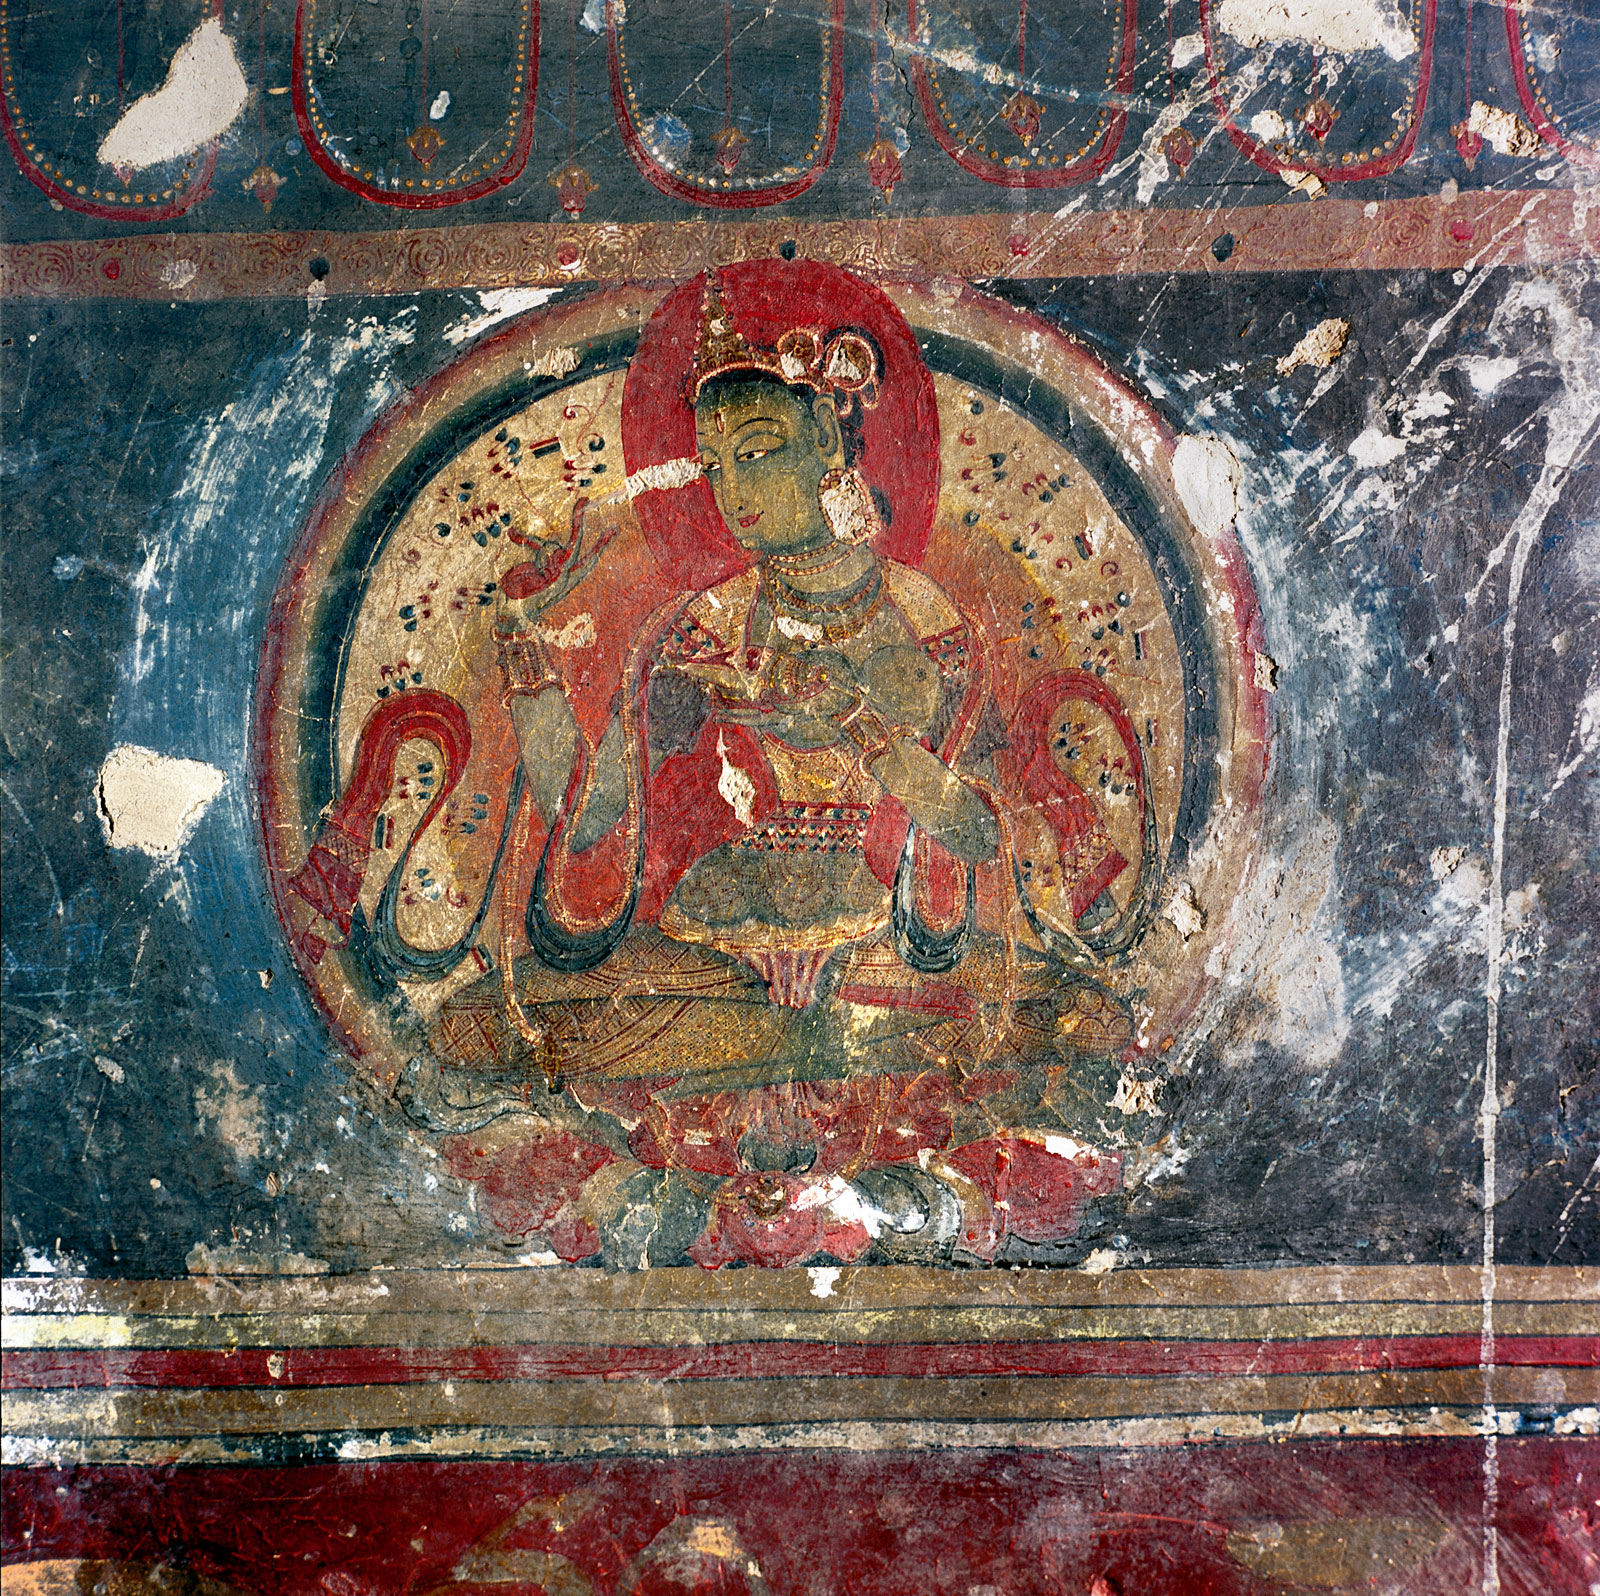 Detail of a wall painting showing the inner offering goddess Gandha holding a shell filled with perfume, Nako, late eleventh or early twelfth century